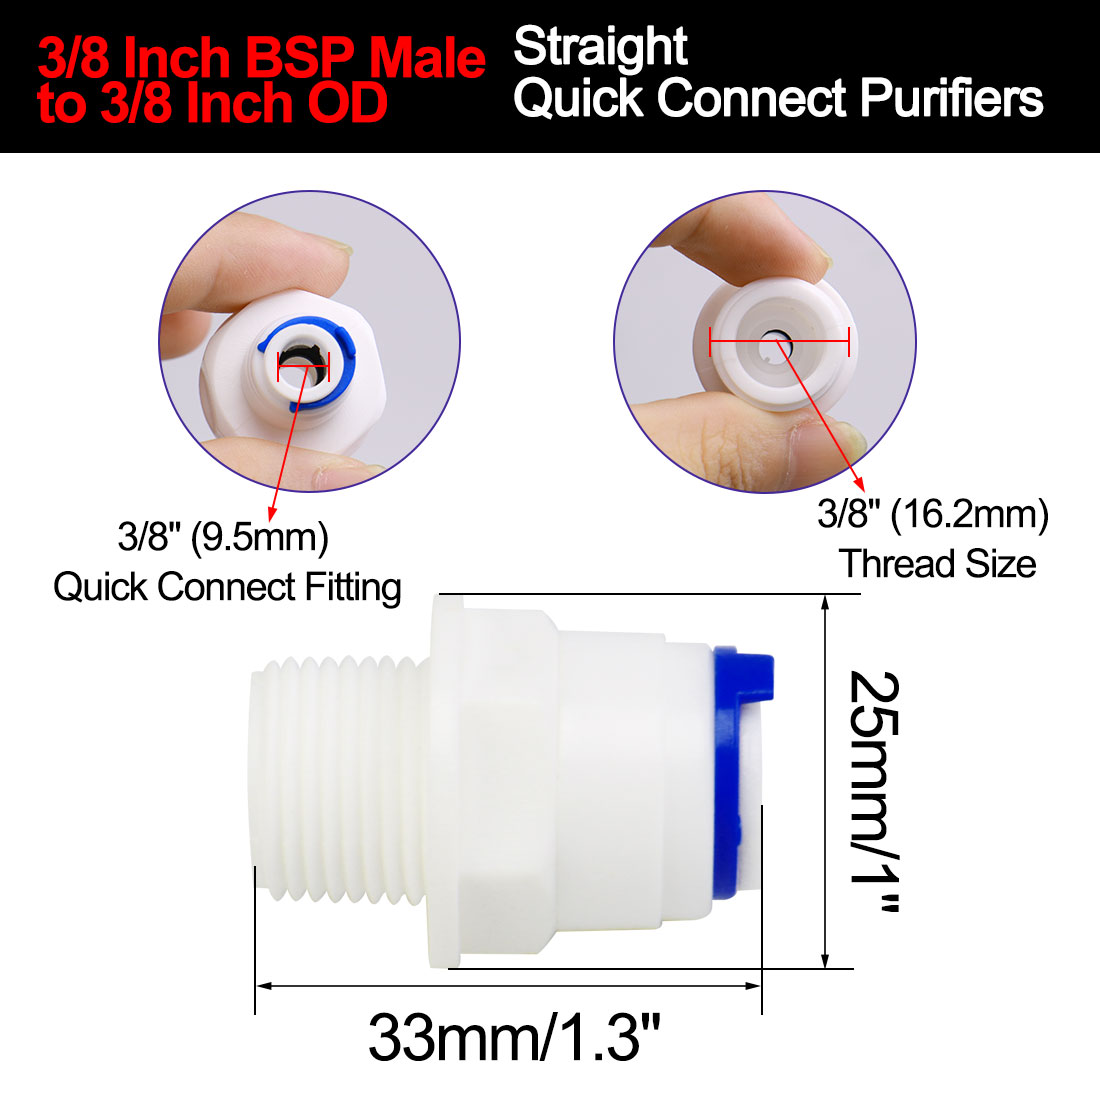 Unique Bargains 3/8 Inch BSP Male to 3/8 Inch OD Straight Quick Connect Purifiers Tube Push 5pcs